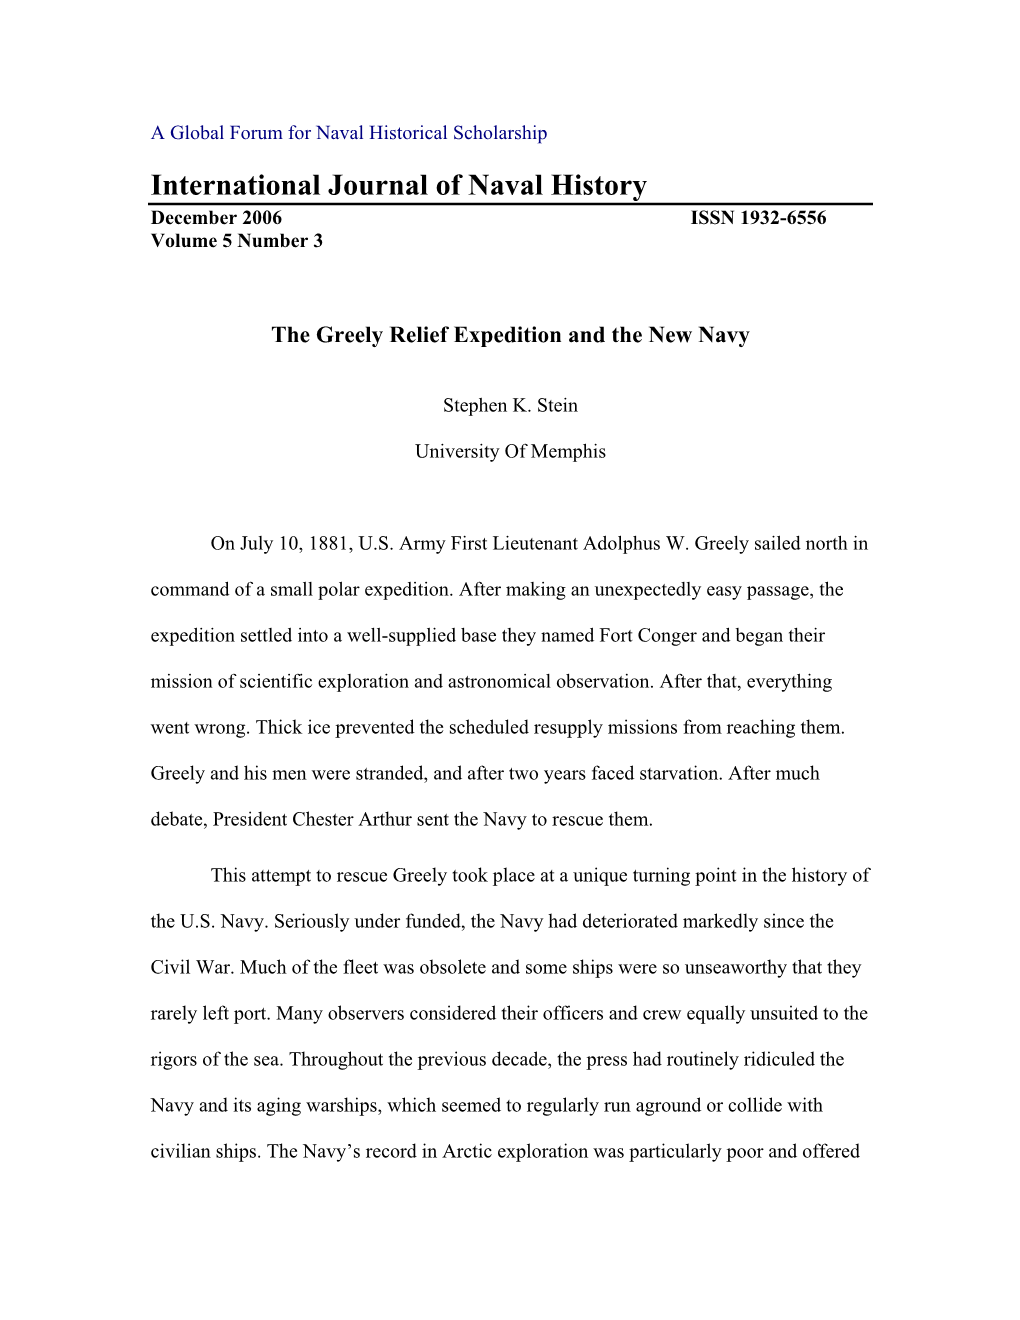 The Greely Relief Expedition and the New Navy